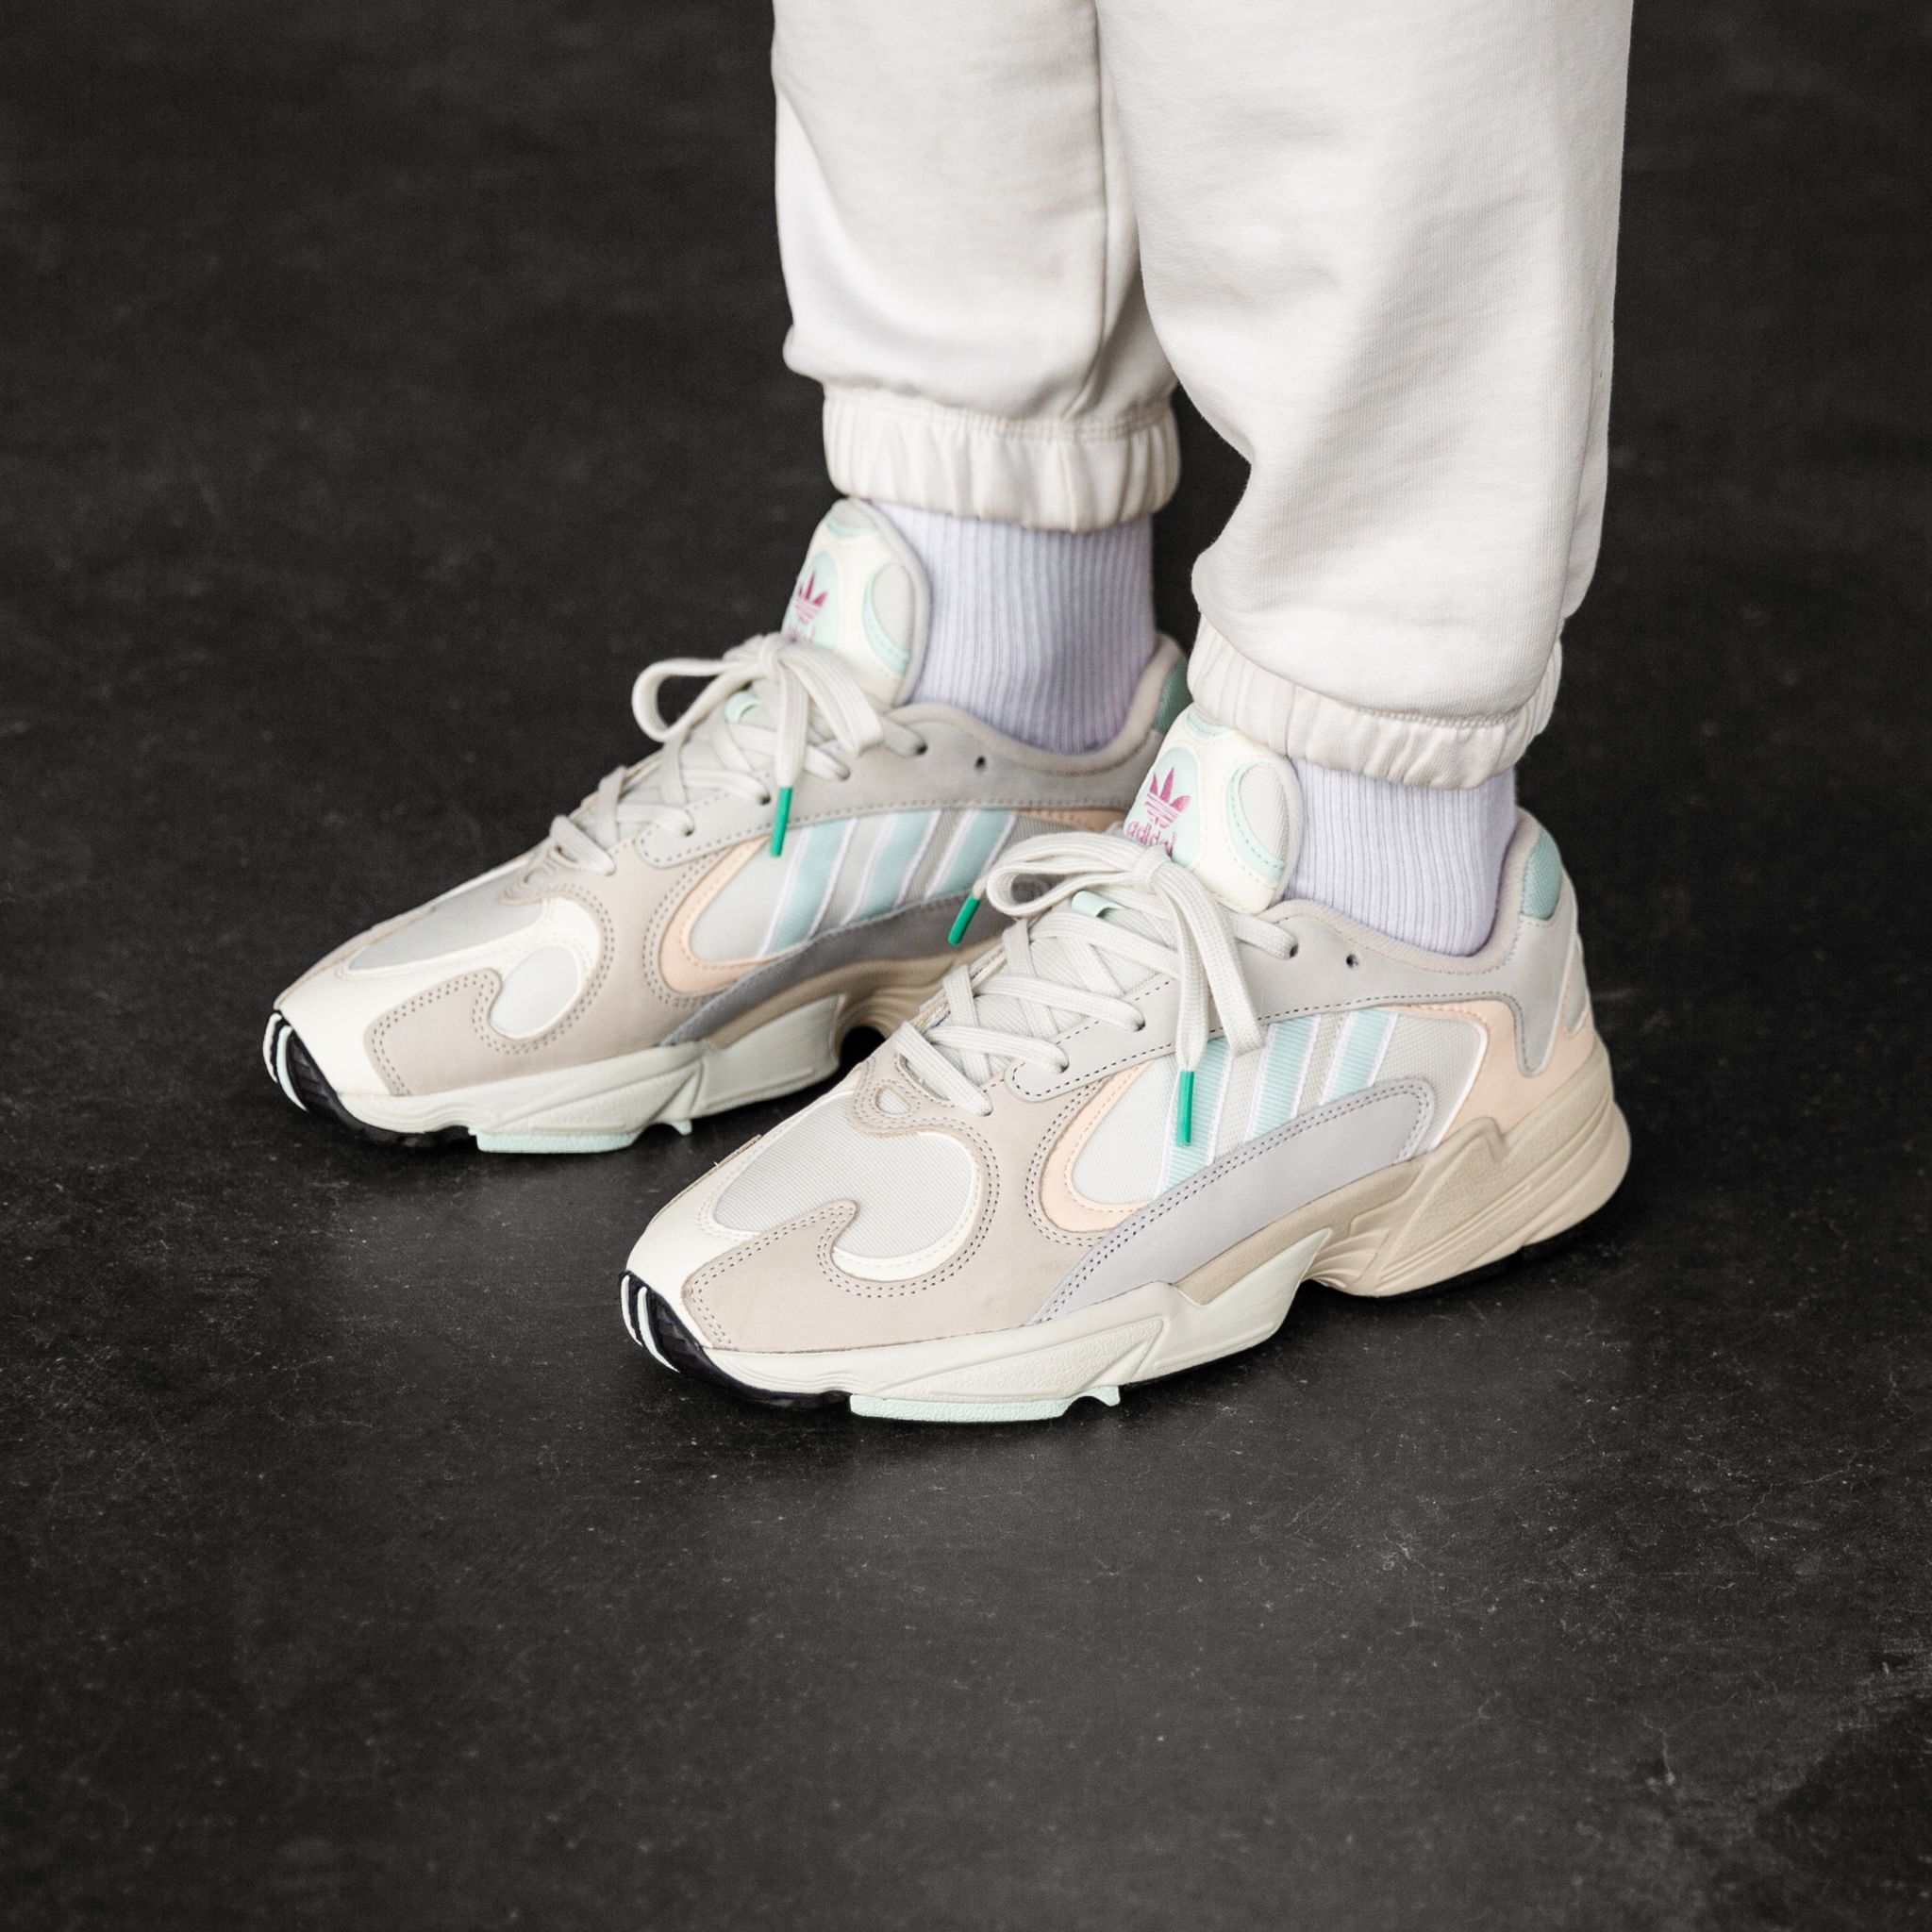 Titolo on Twitter: "NEW IN ! Adidas Yung-1 - Off White/Ice SHOP HERE: https://t.co/FHEqmkkXKc https://t.co/hxbksmSmwV" /